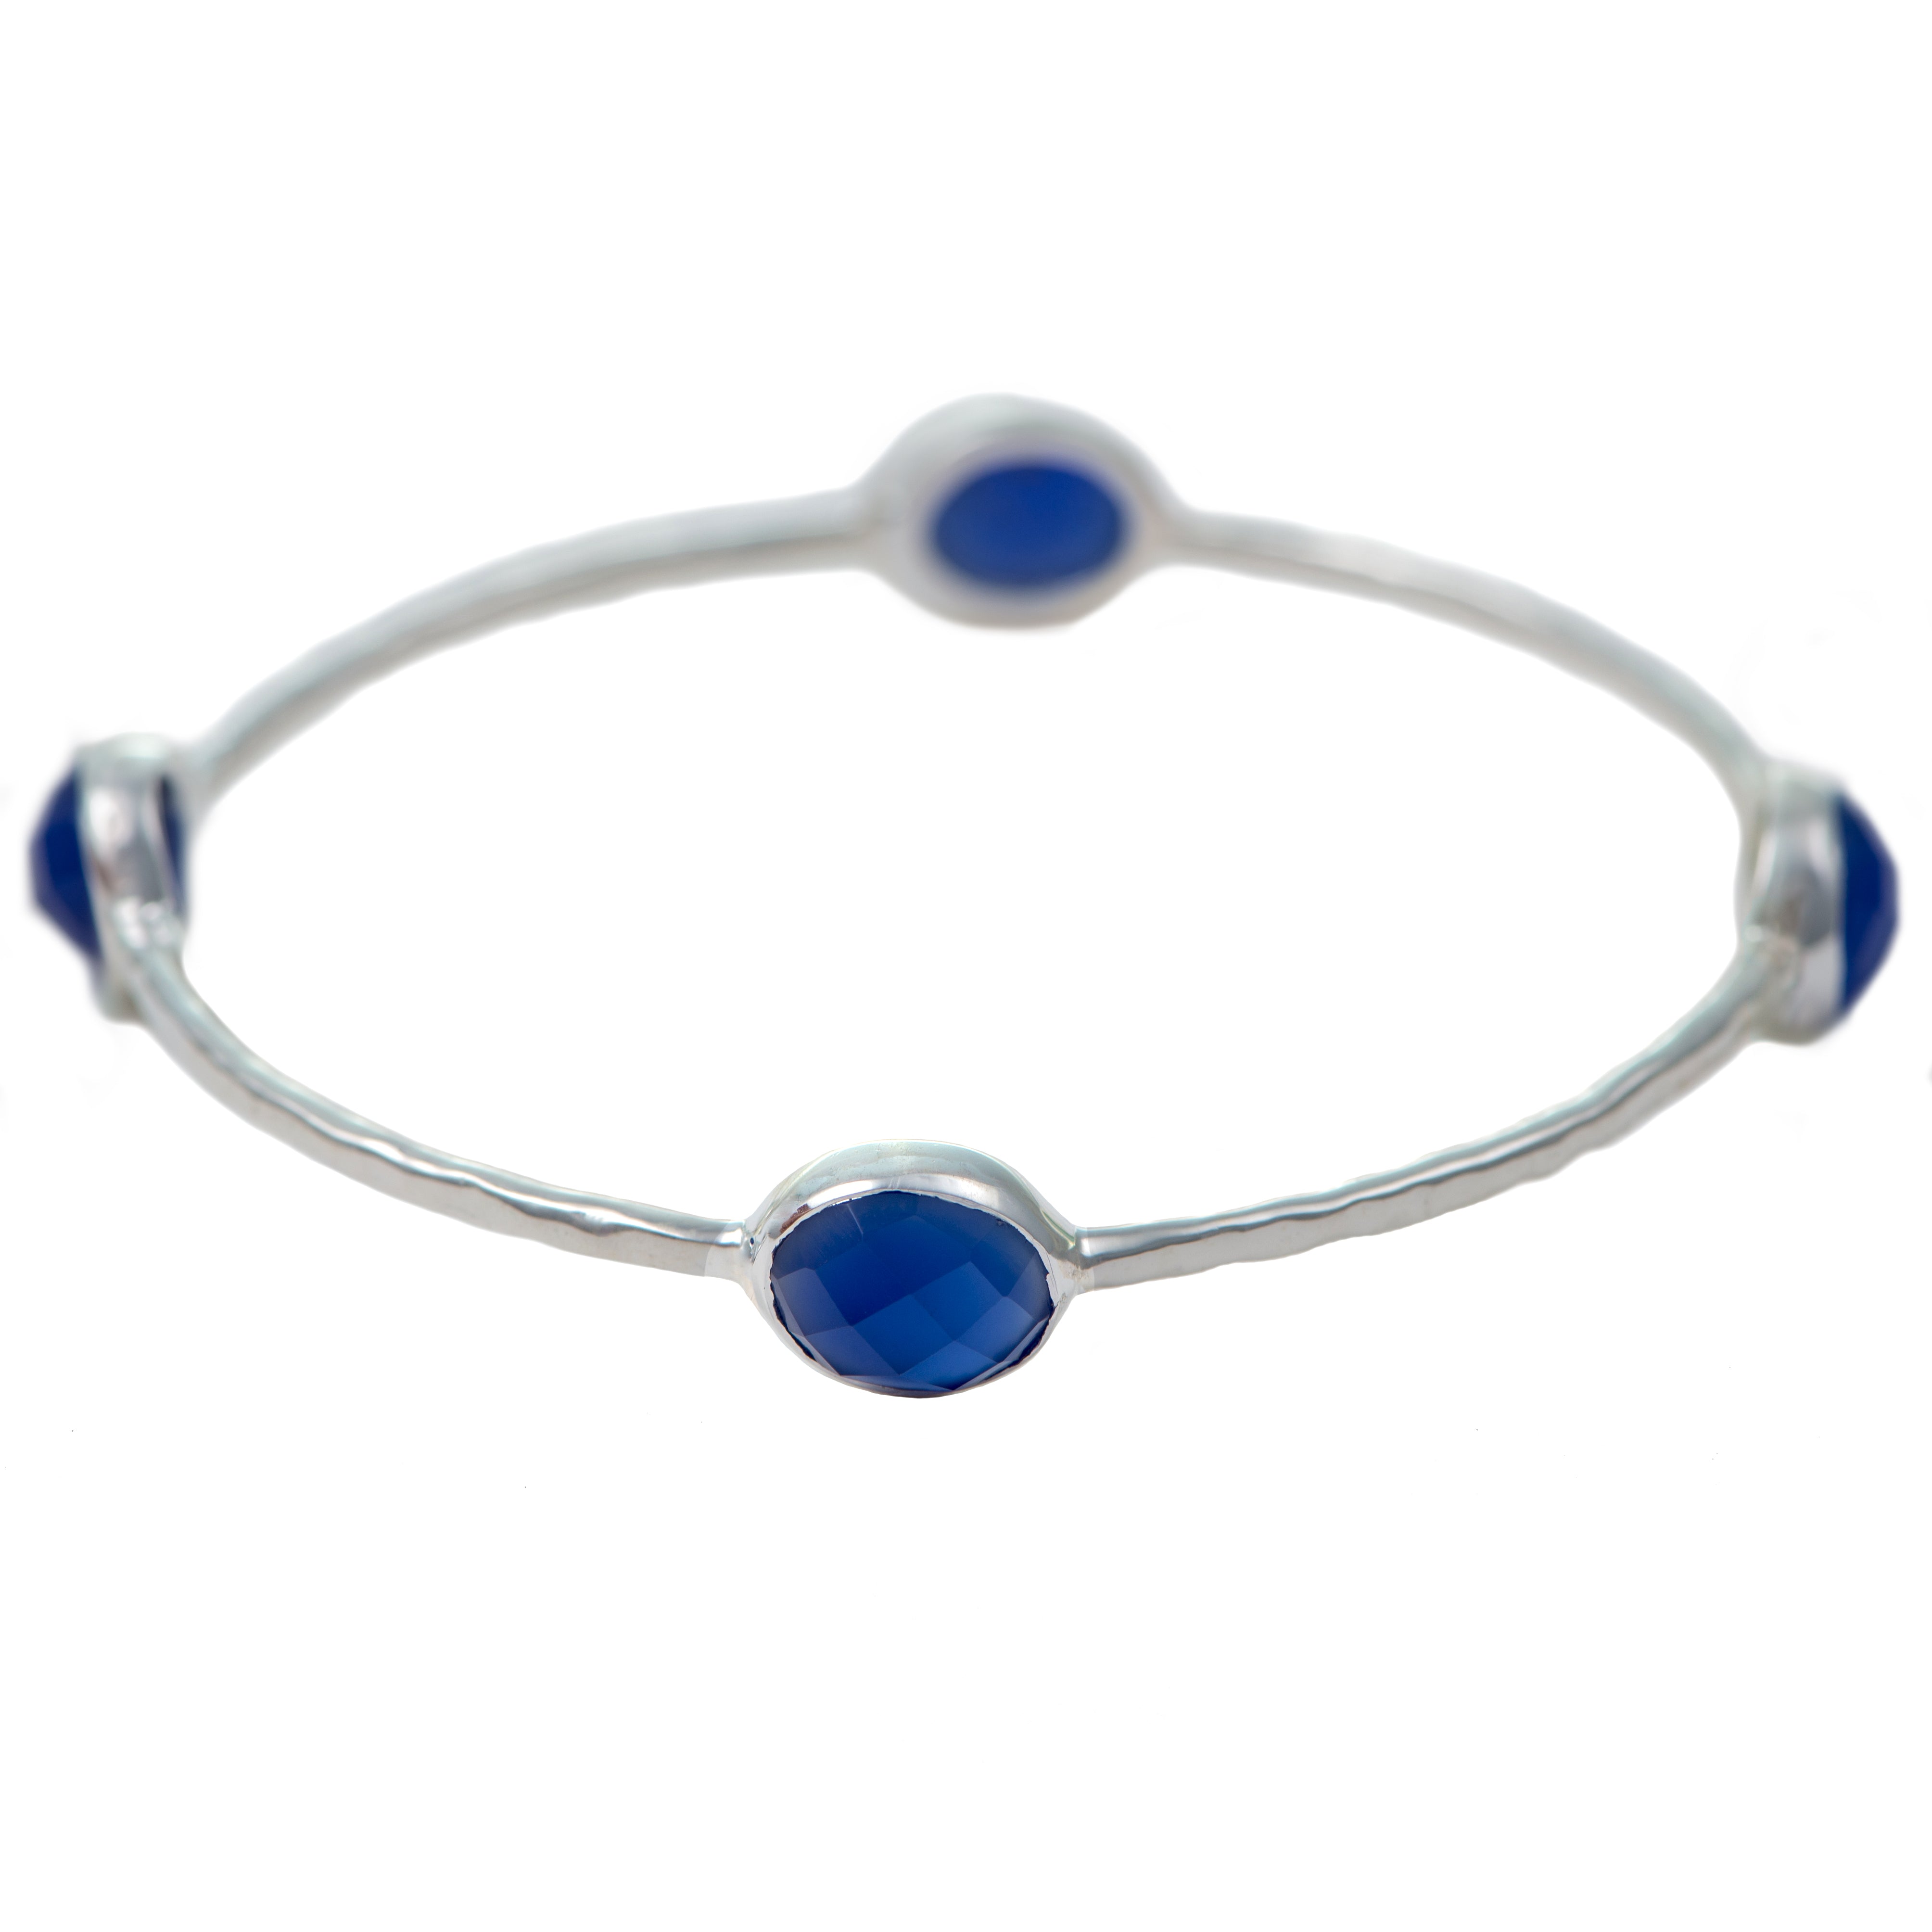 Blue Chalcedony Gemstone Bangle in Sterling Silver